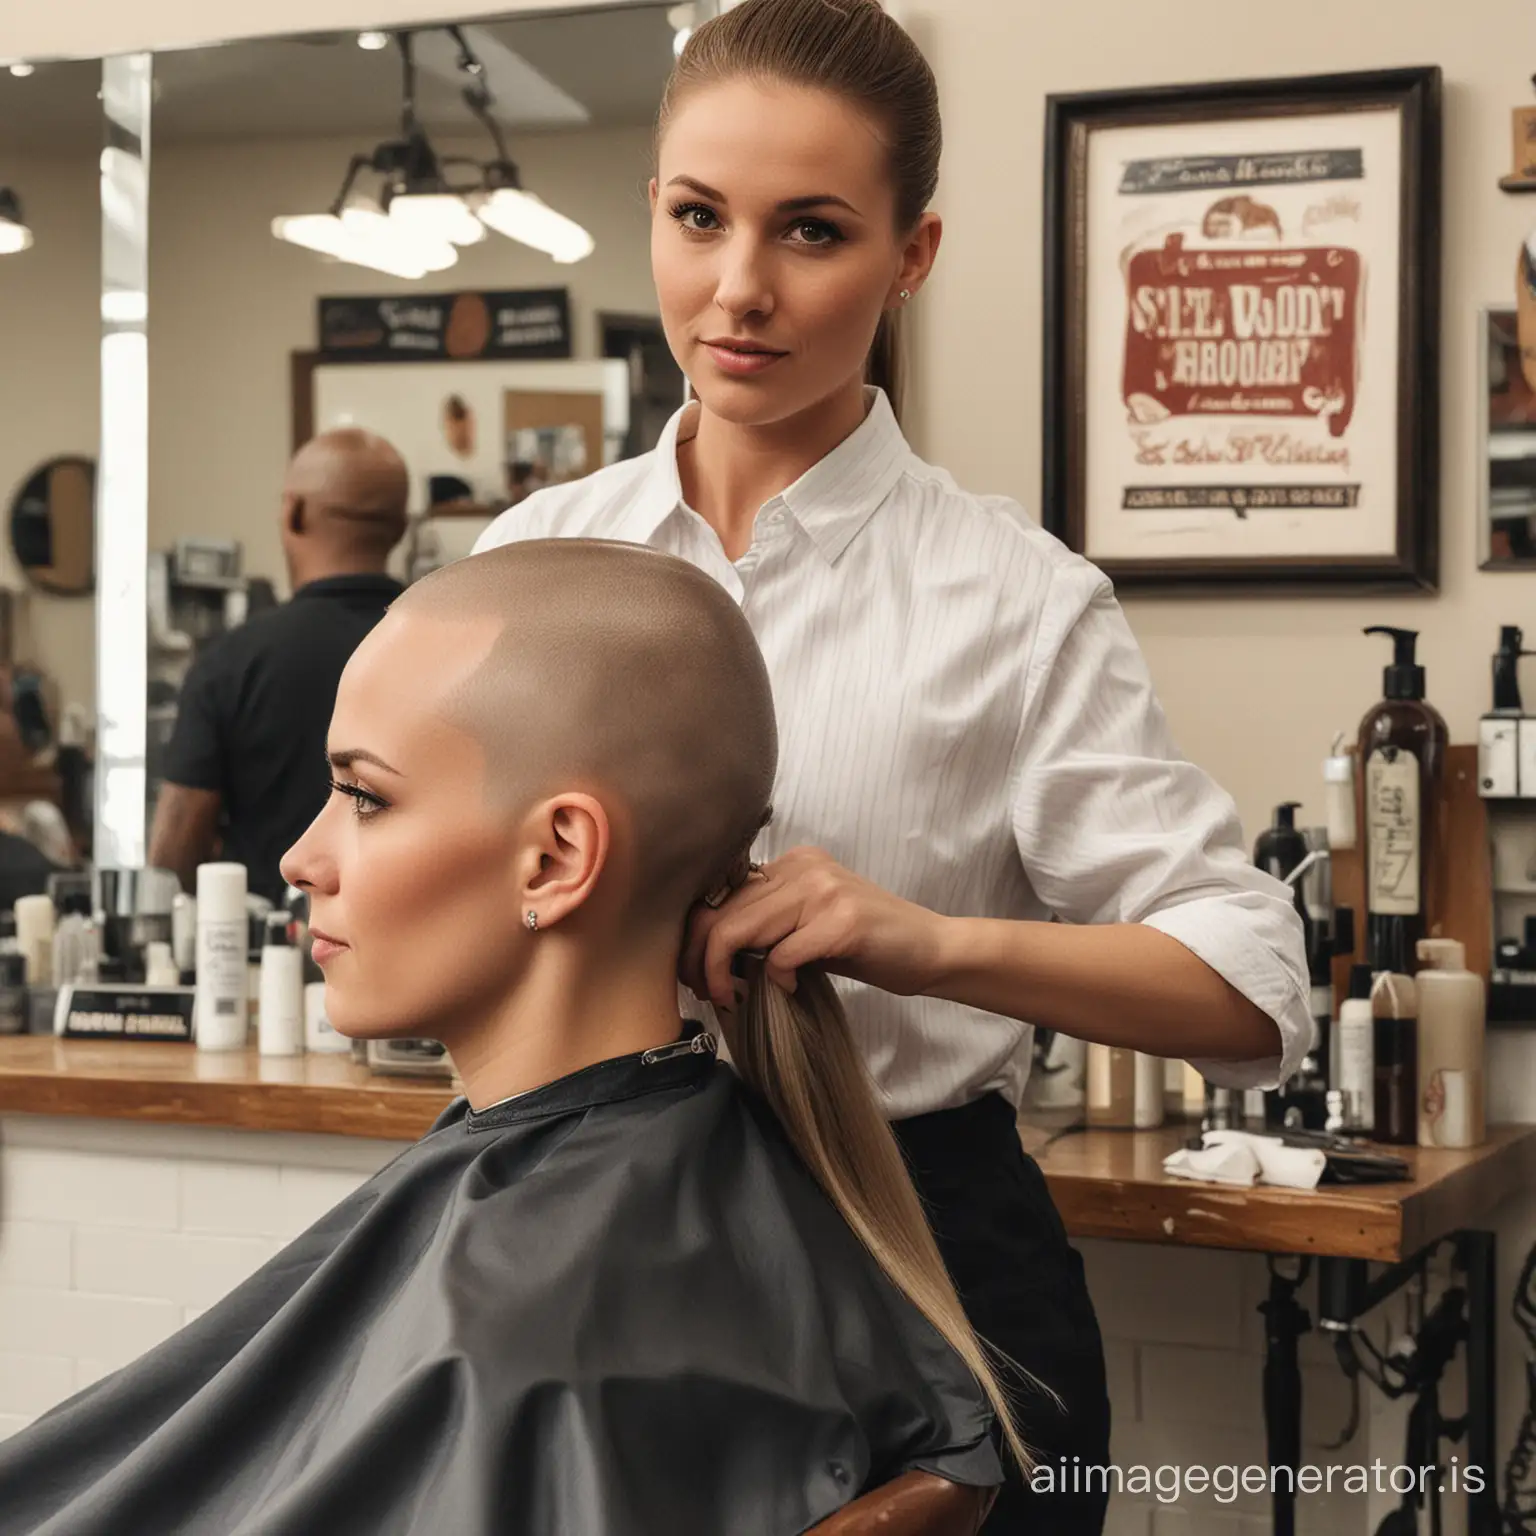 show a woman sitting in a barber shop with a bald head. There is a barber behind her who is holding up a long ponytail that he has cut from the woman's head.